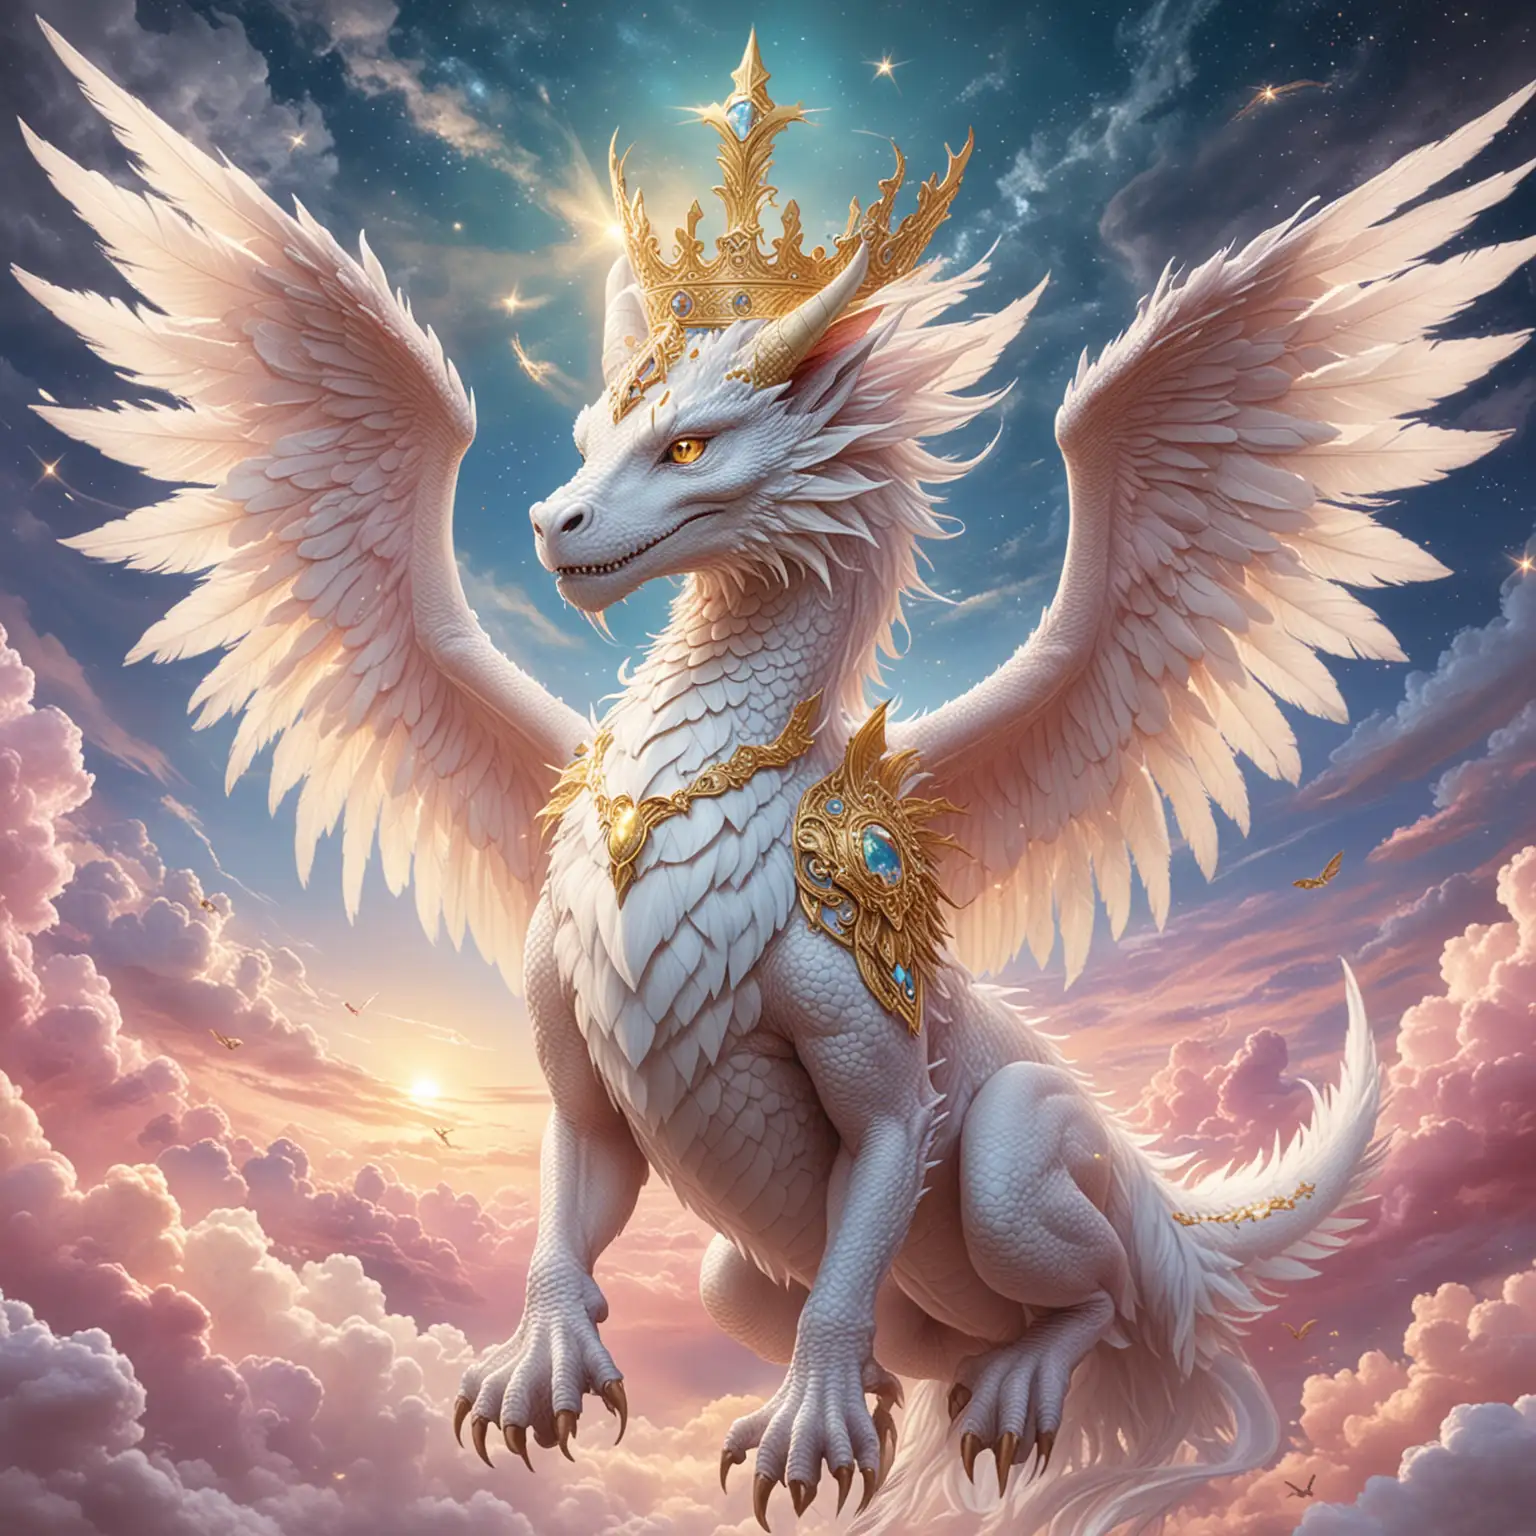 white seraphim female dragon, gold crown on head, feather like wings, flying in a celestial sky of white, yellow, pink, blue